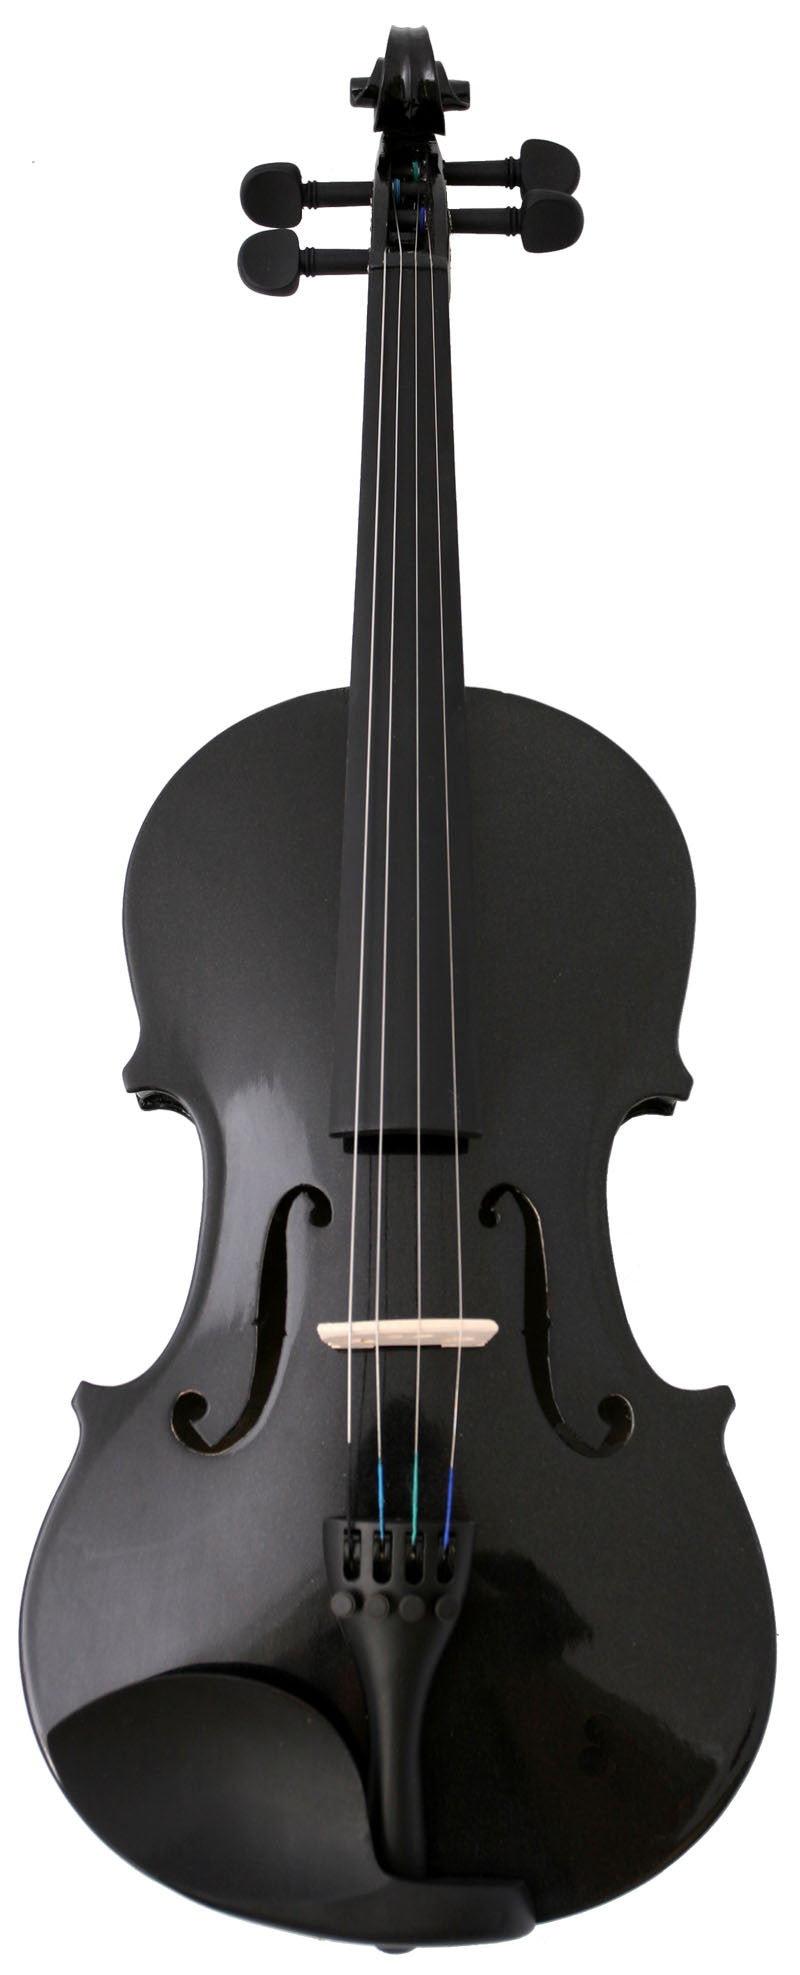 Crescent Direct Vl-bk 4/4 Black Maplewood Acoustic Violin With Case, Rosin, And Bow